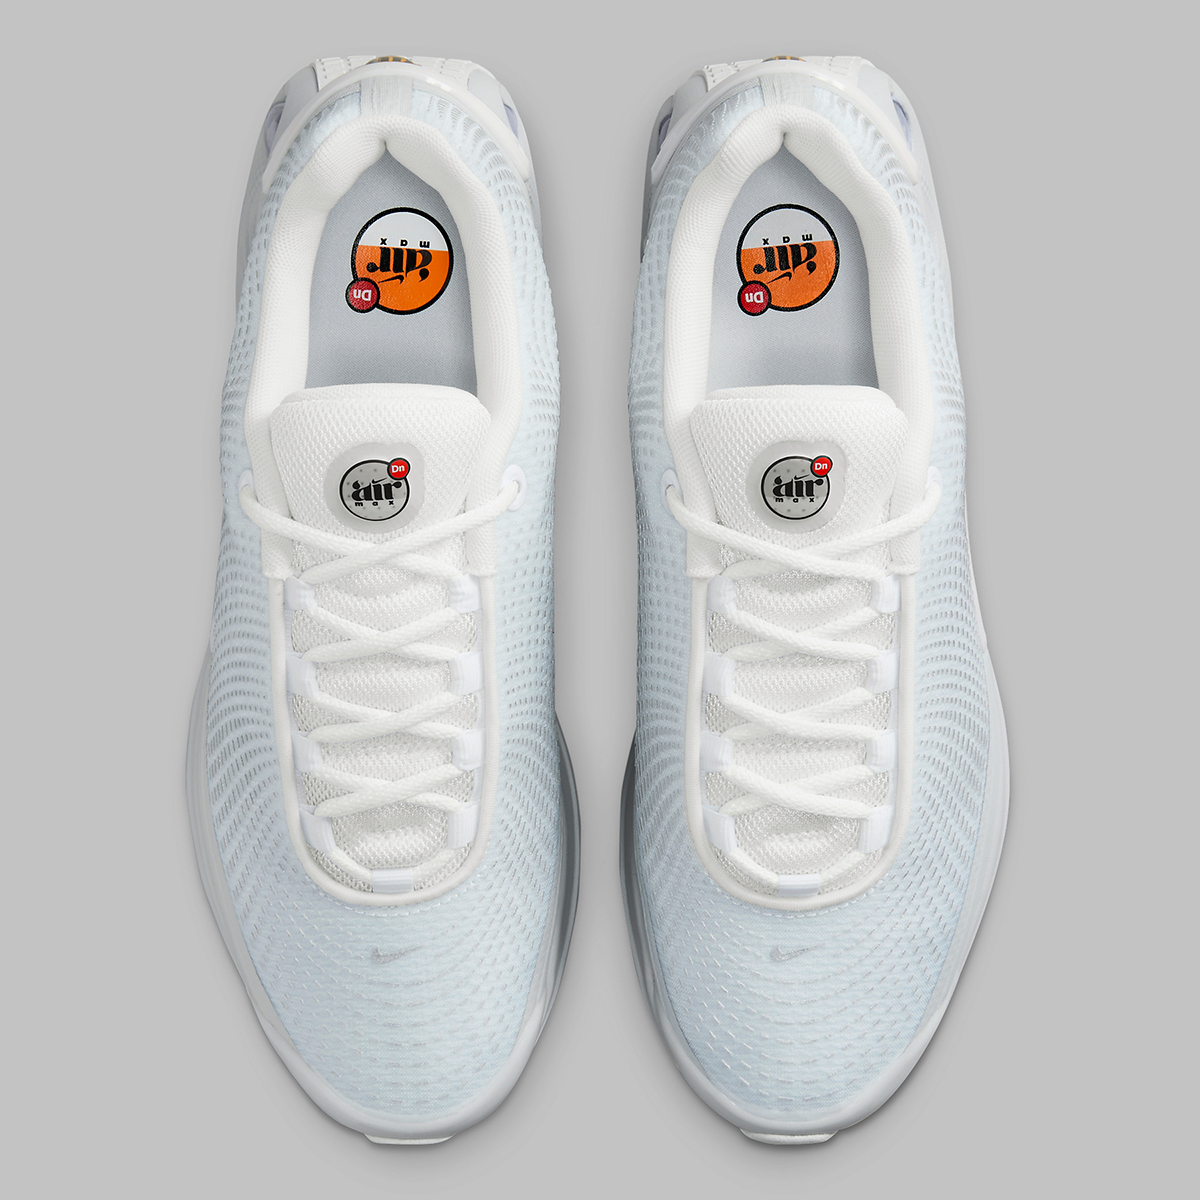 Official Retailer Images Of The Nike Air Max Dn 